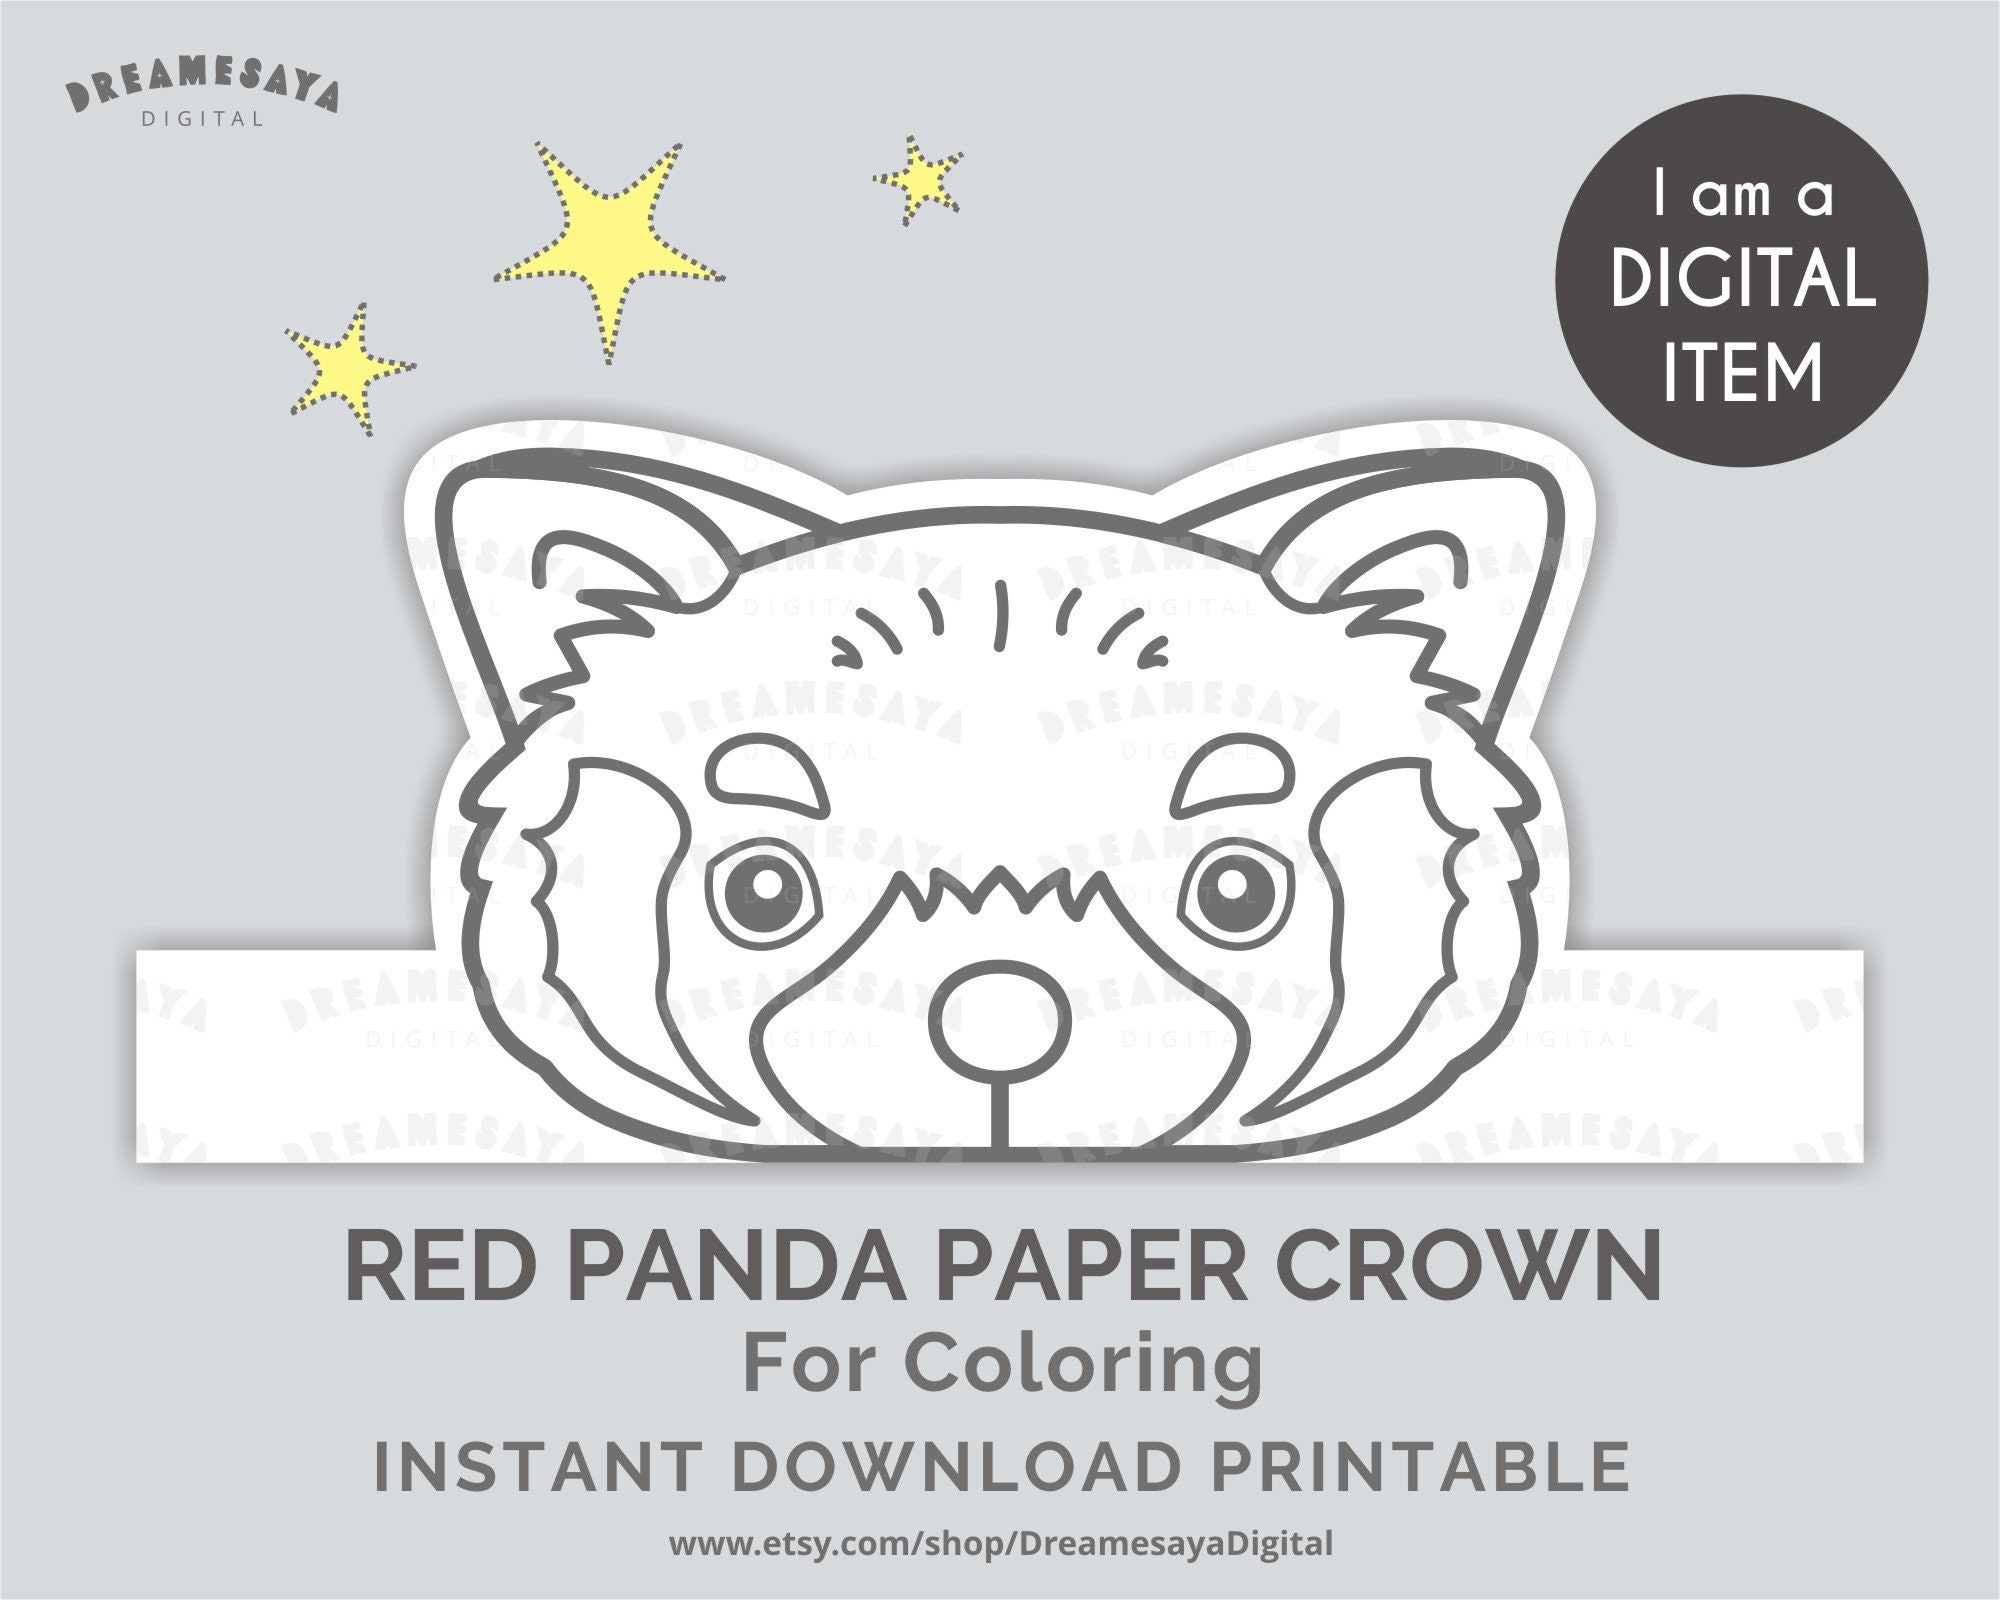 Red panda coloring paper crown printable cute animal face to color and wear downloadable files for fun party favor